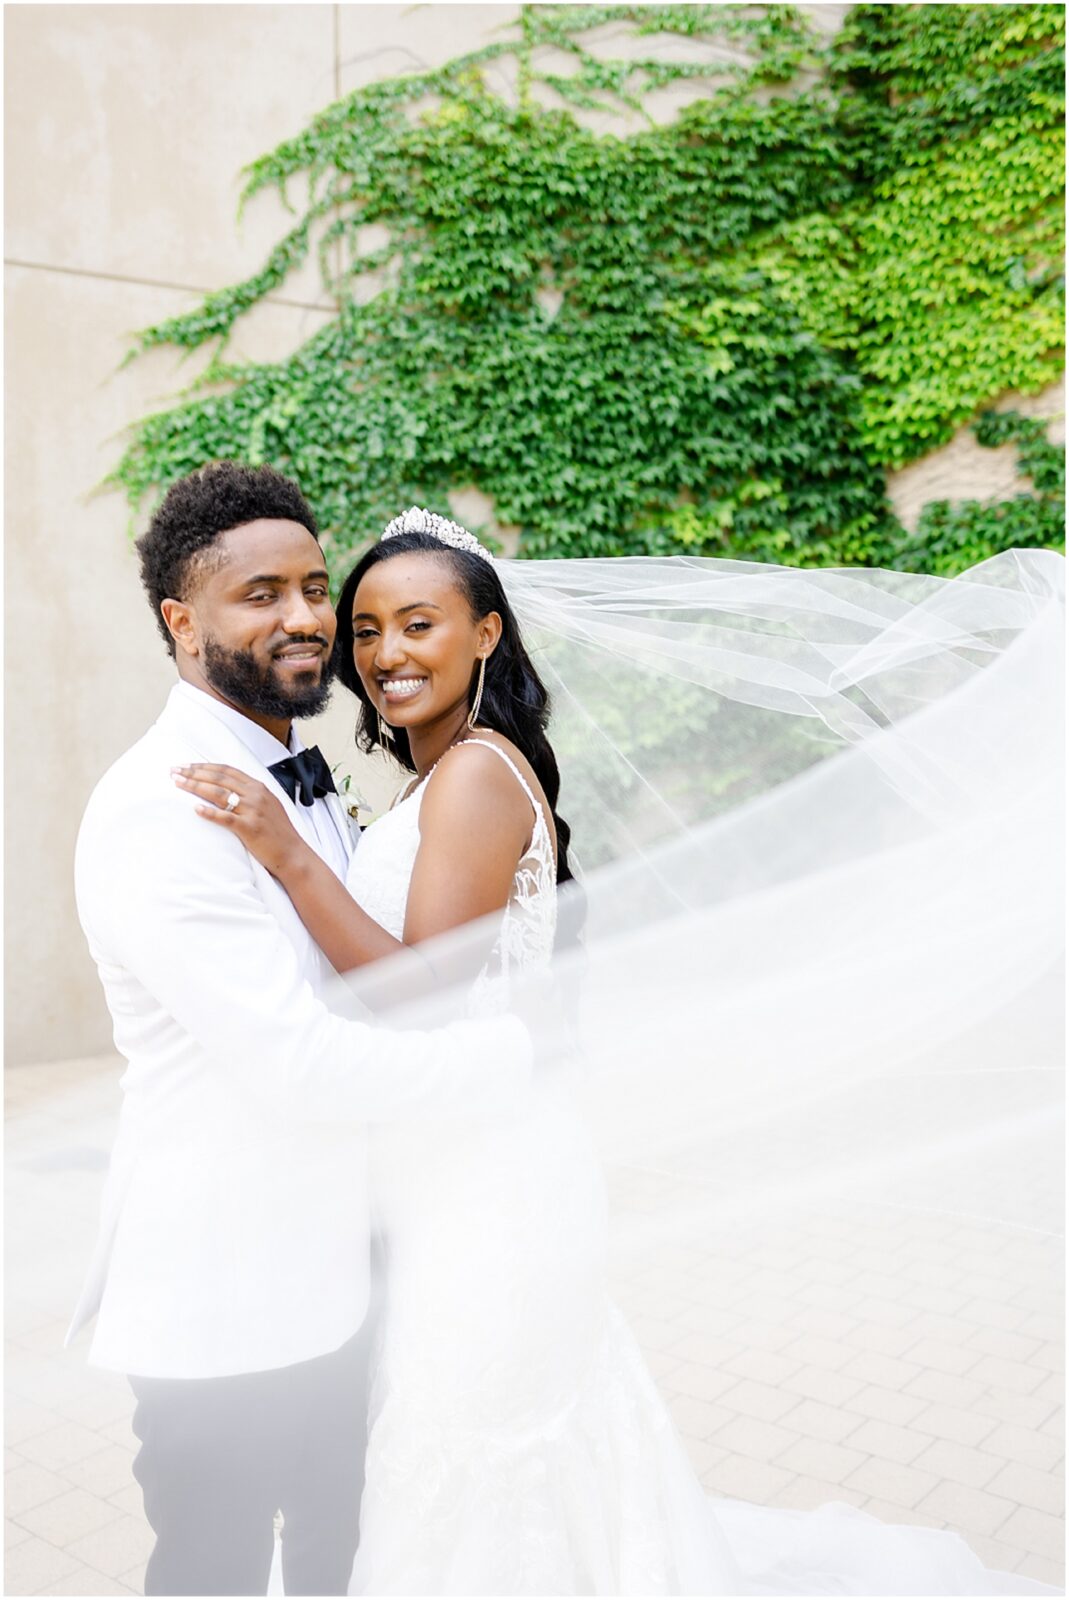 Kansas City Wedding Photography | Affordable Wedding Photographer in KC | Luxury Wedding Photography and Engagement Photos for Ethiopian Wedding in KC by Mariam Saifan Photography at Loews Hotel and Kauffman Center 